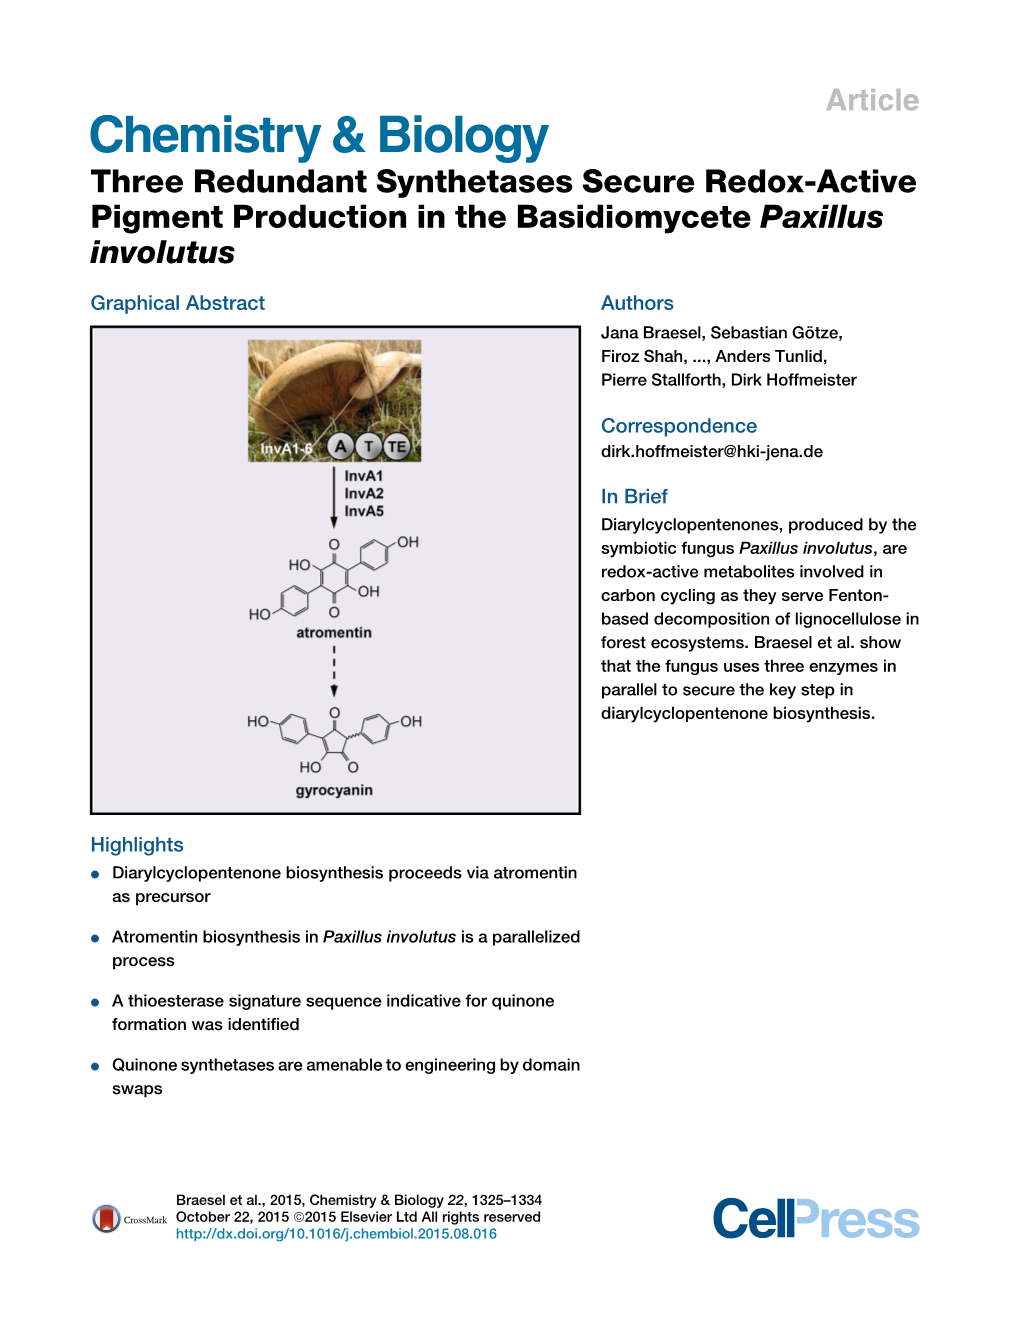 Three Redundant Synthetases Secure Redox-Active Pigment Production in the Basidiomycete Paxillus Involutus